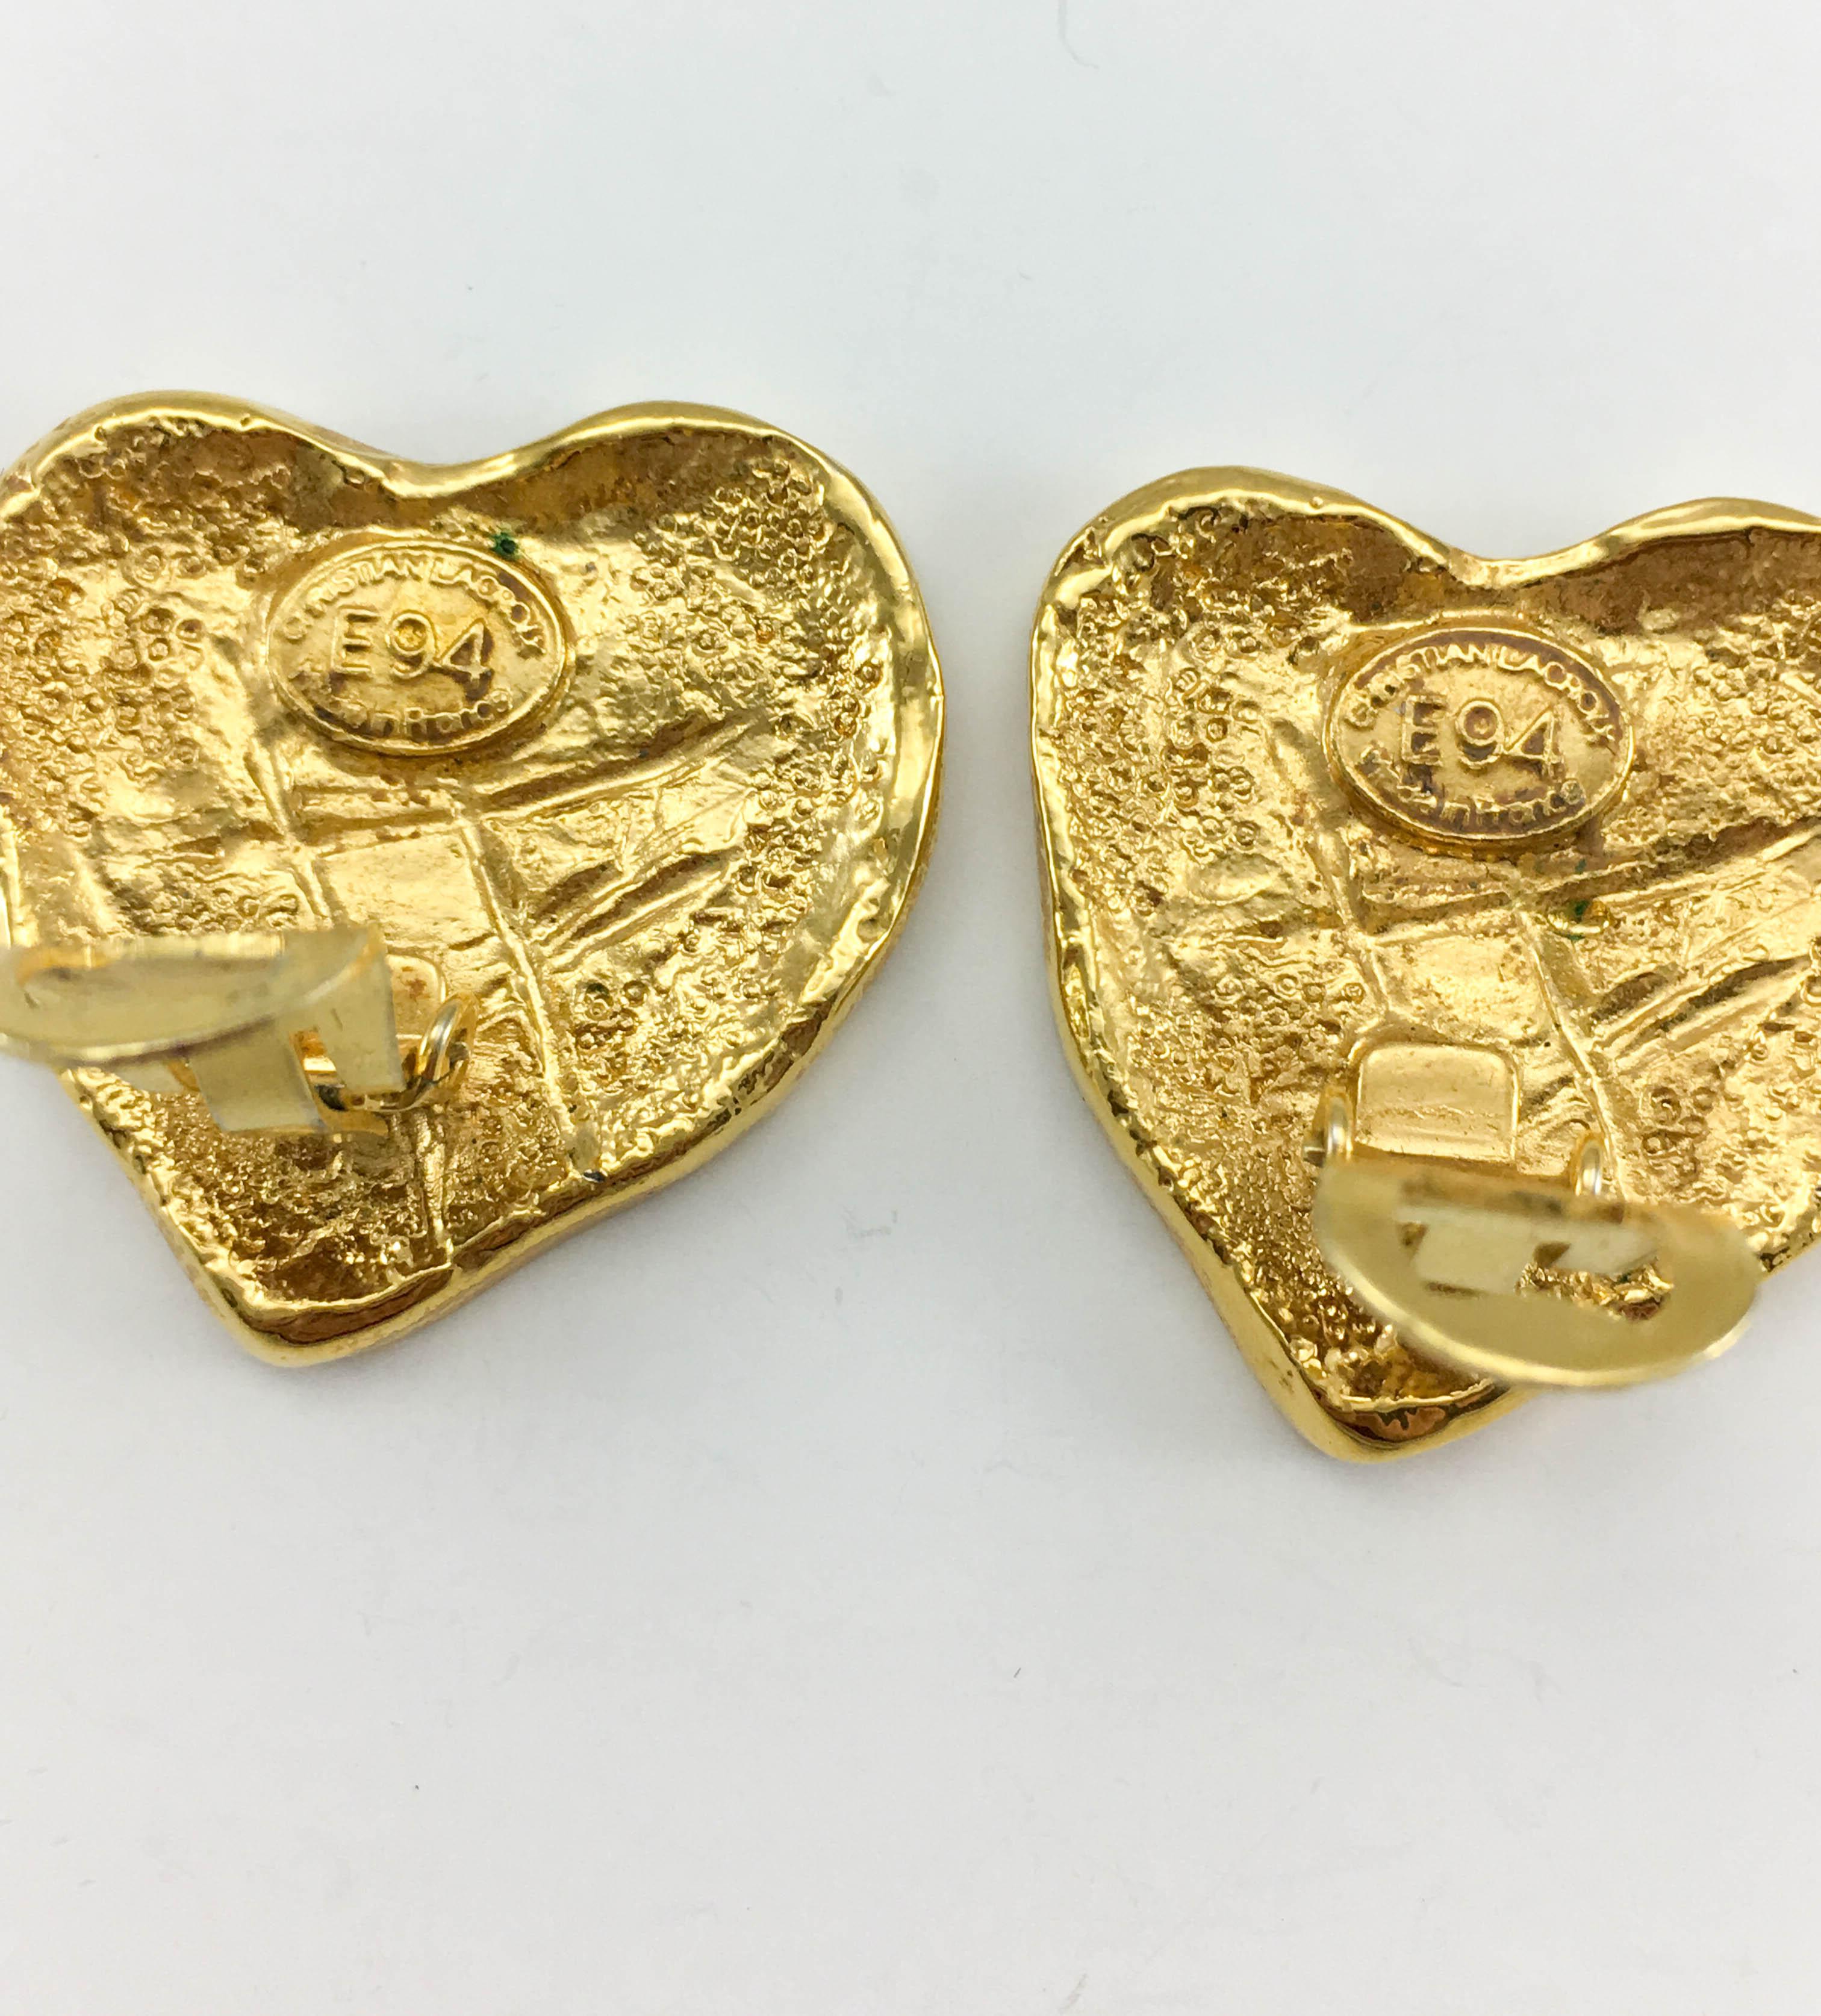 1994 Christian Lacroix Gold-Plated Modernist Heart Earrings For Sale 4